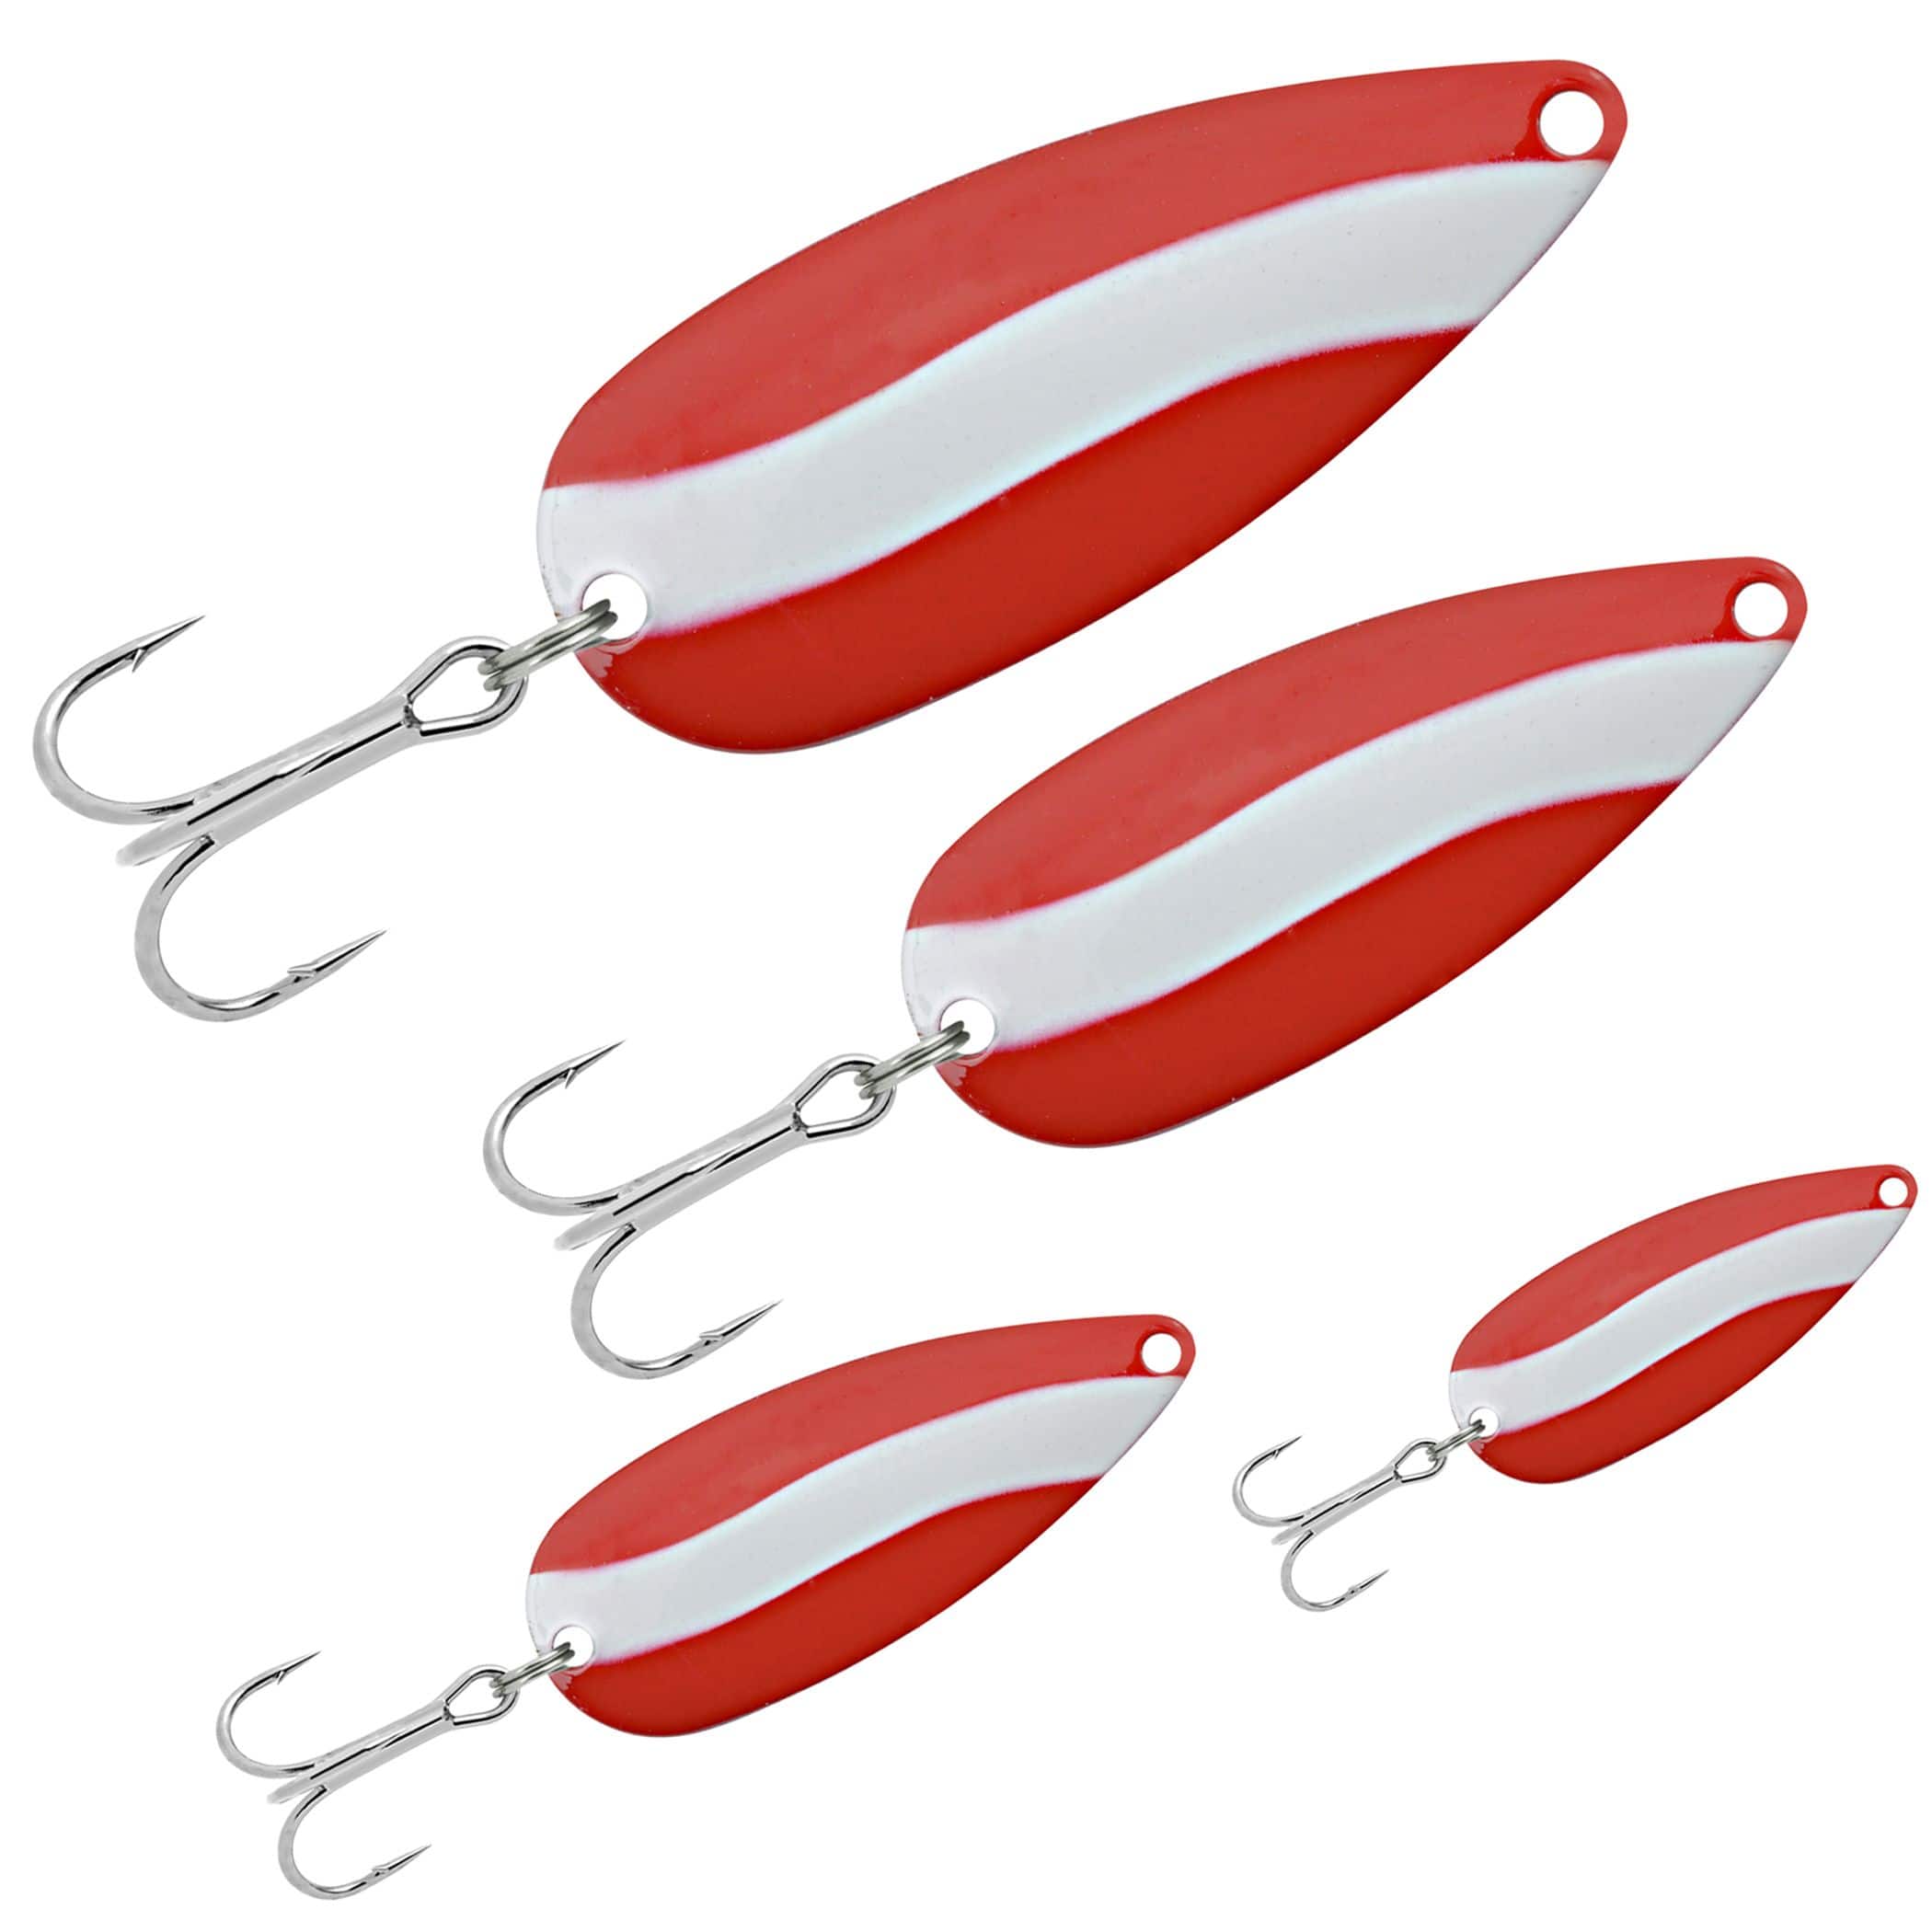 https://media-www.canadiantire.ca/product/playing/fishing/fishing-lures/0782144/danielson-spoon-assortment-red-white-3-pack-20ee71fd-b37e-4b9f-a1fa-14ddc0b8bbb3-jpgrendition.jpg